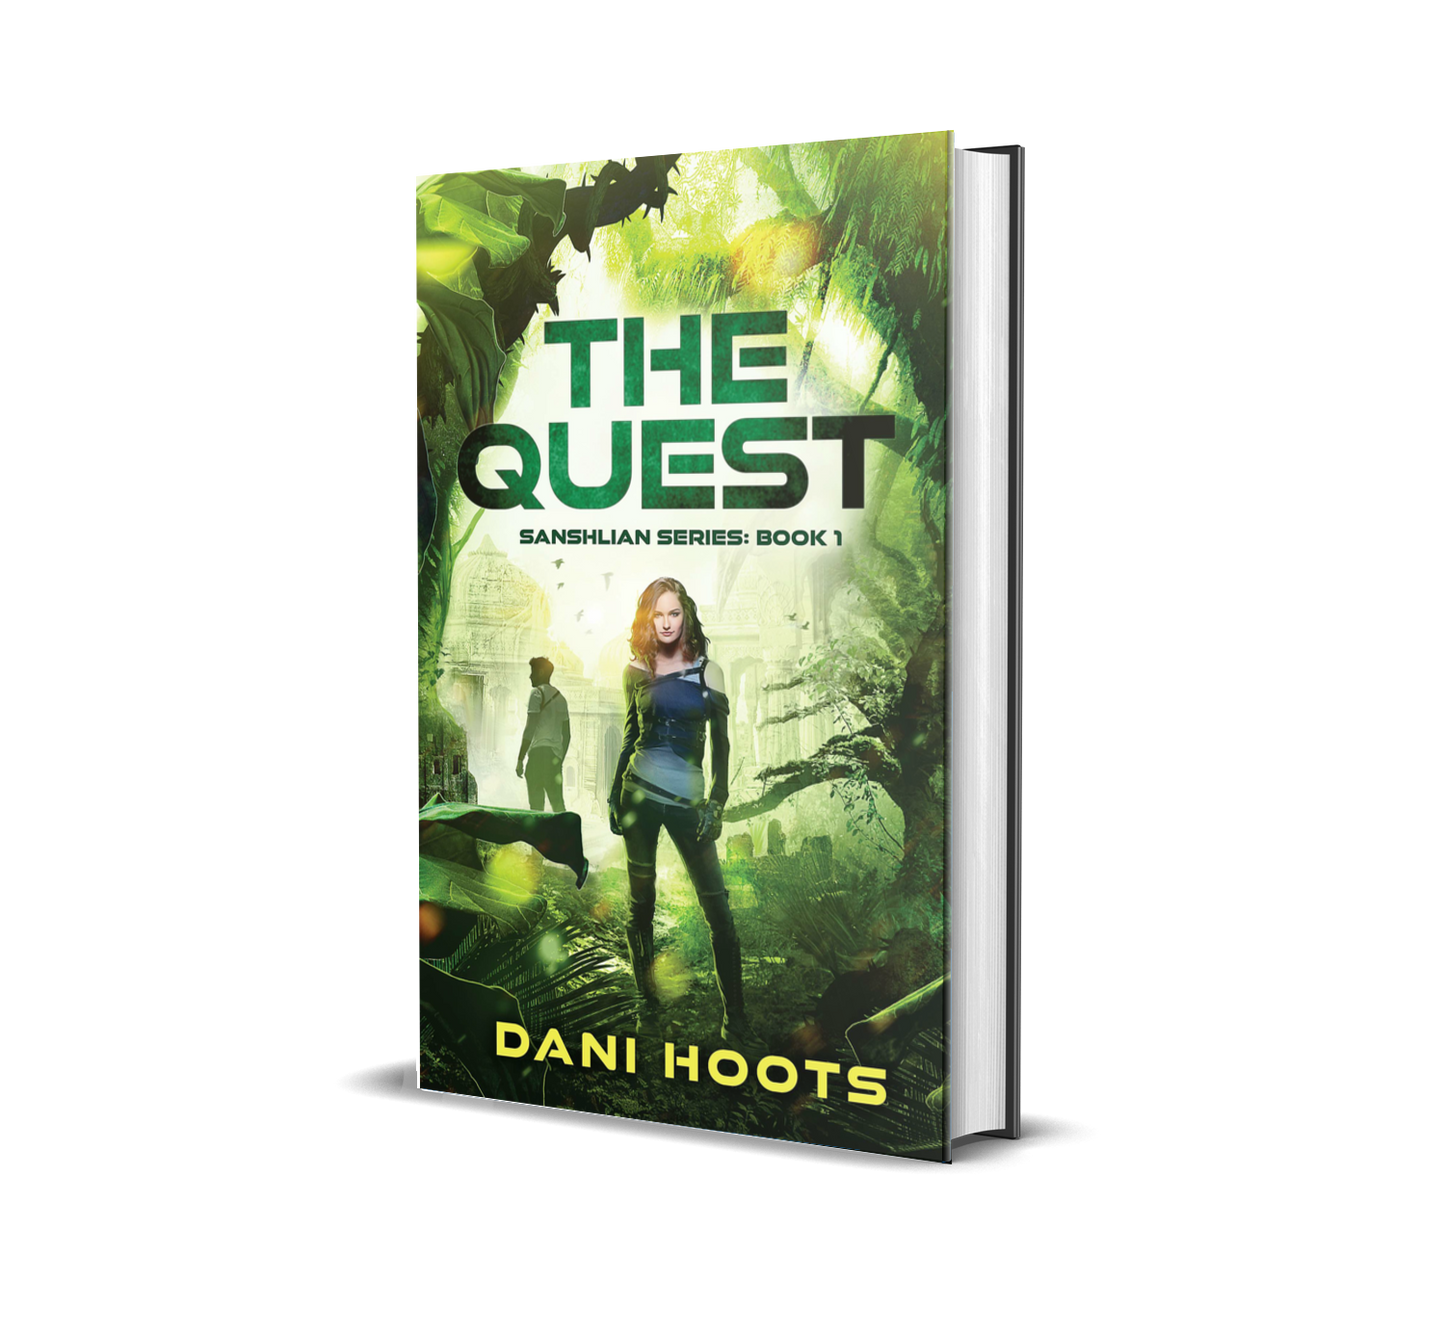 The Quest (Sanshlian Series, Book 1) hardcover — SIGNED